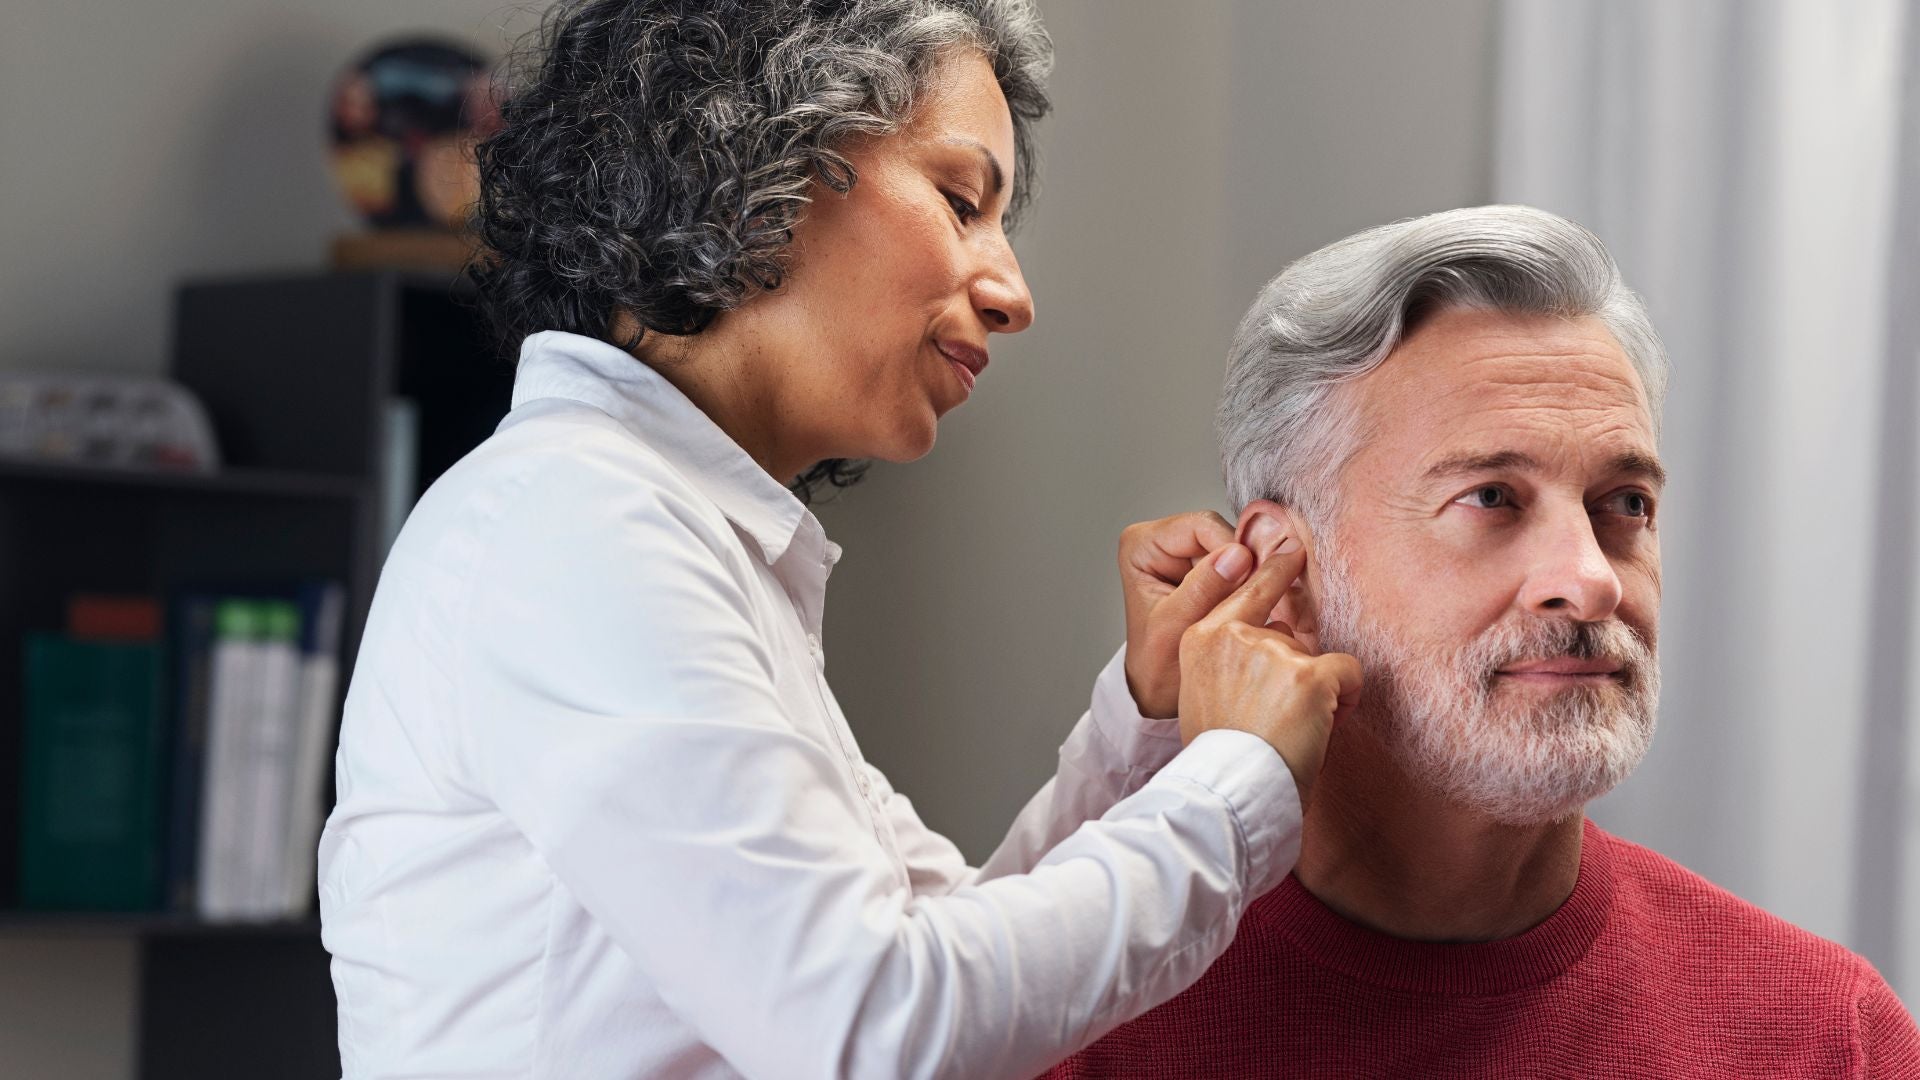 10 Tips for Adjusting to Wearing Hearing Aids for the First Time